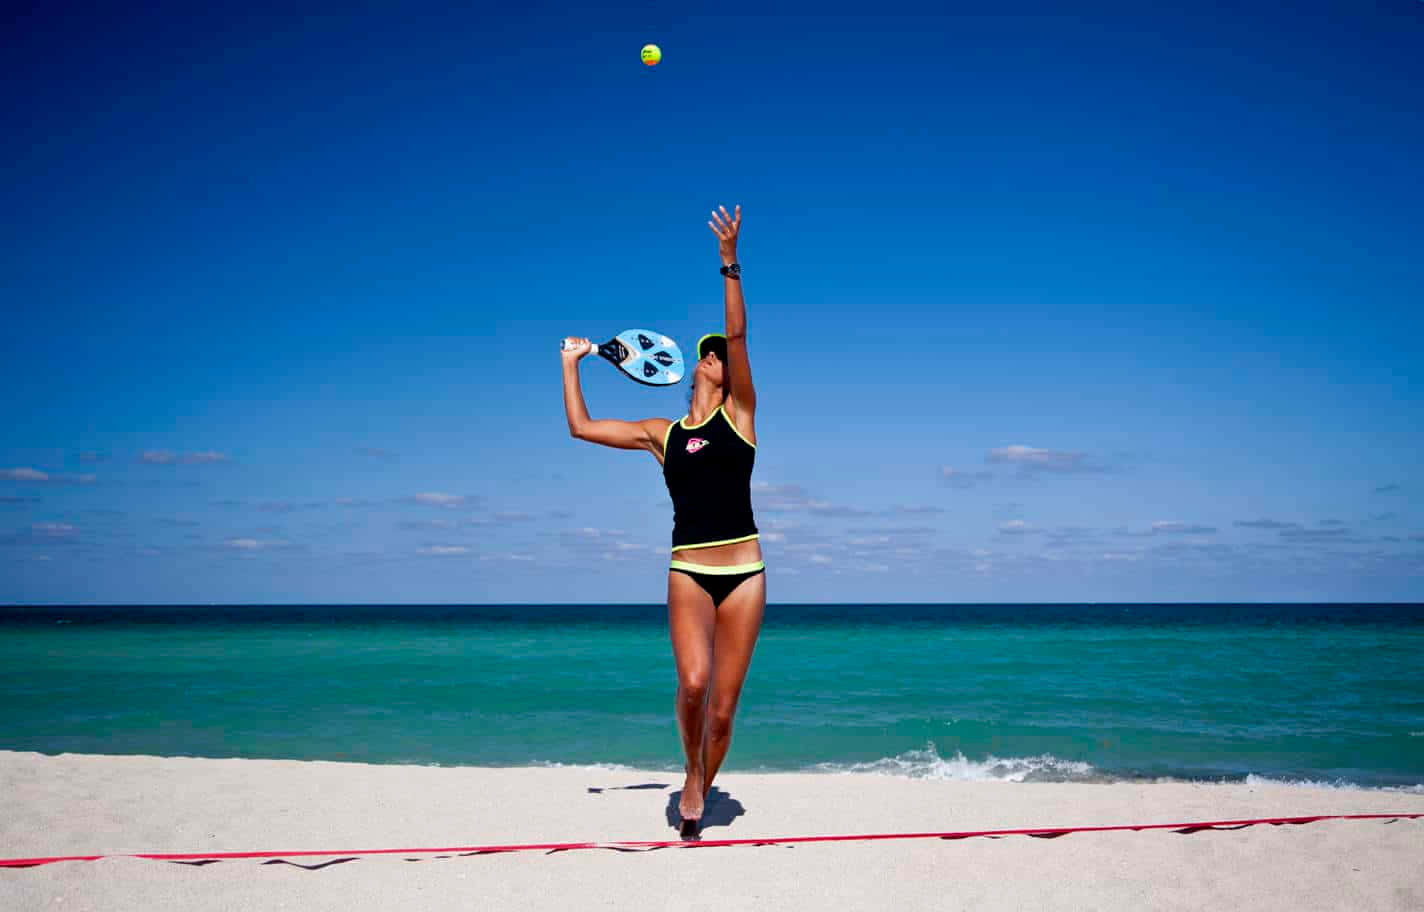 Exciting game of Beach Tennis in action Wallpaper